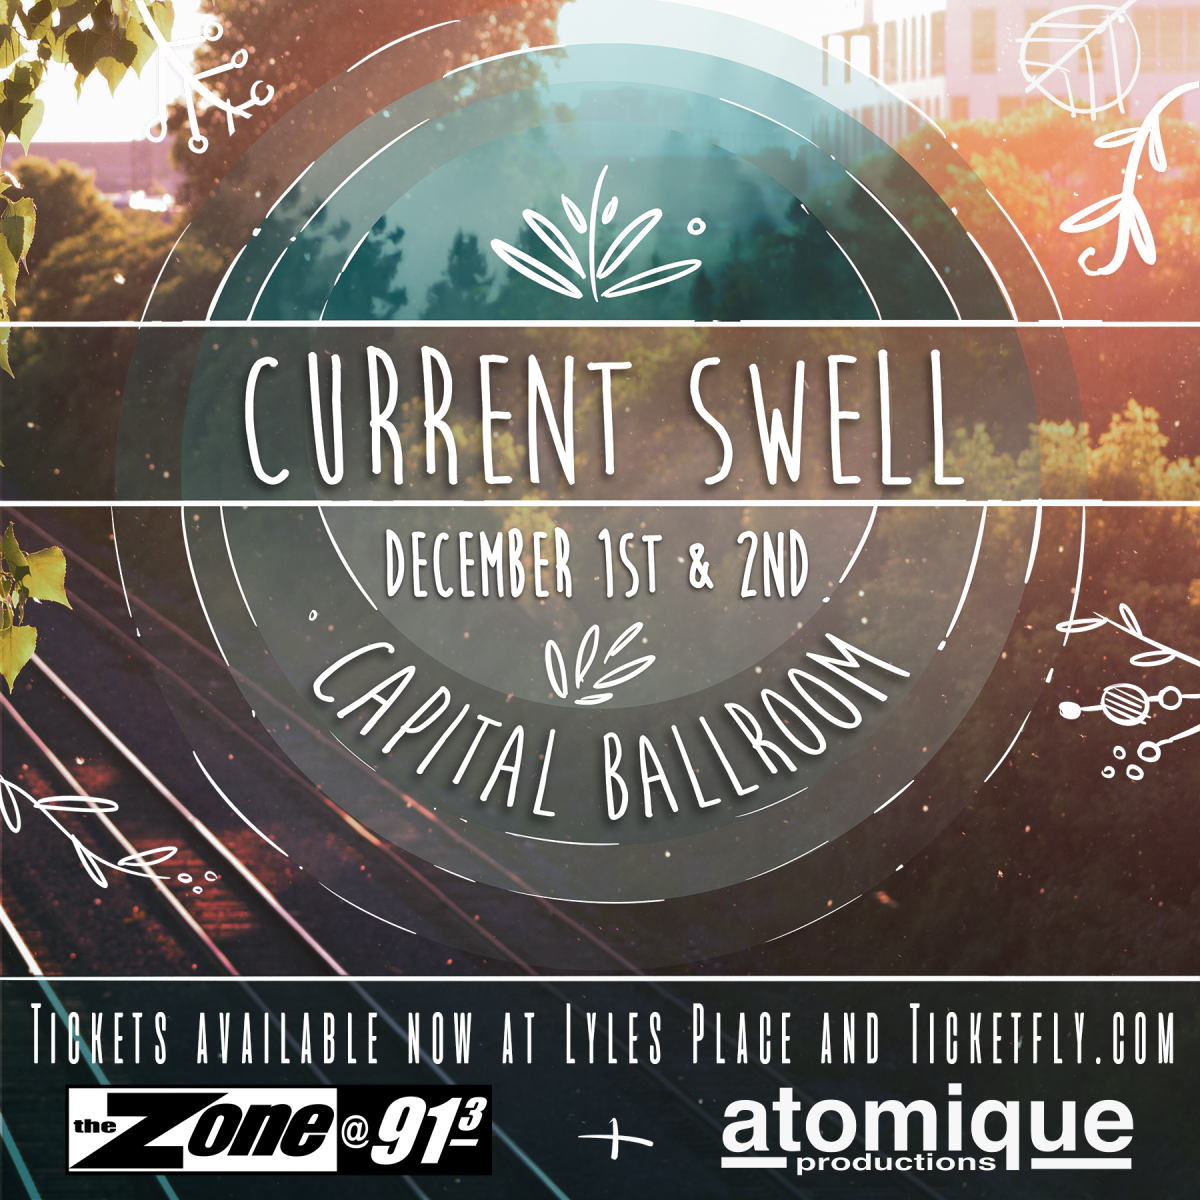 Win tickets to our Zone Show w/ Current Swell